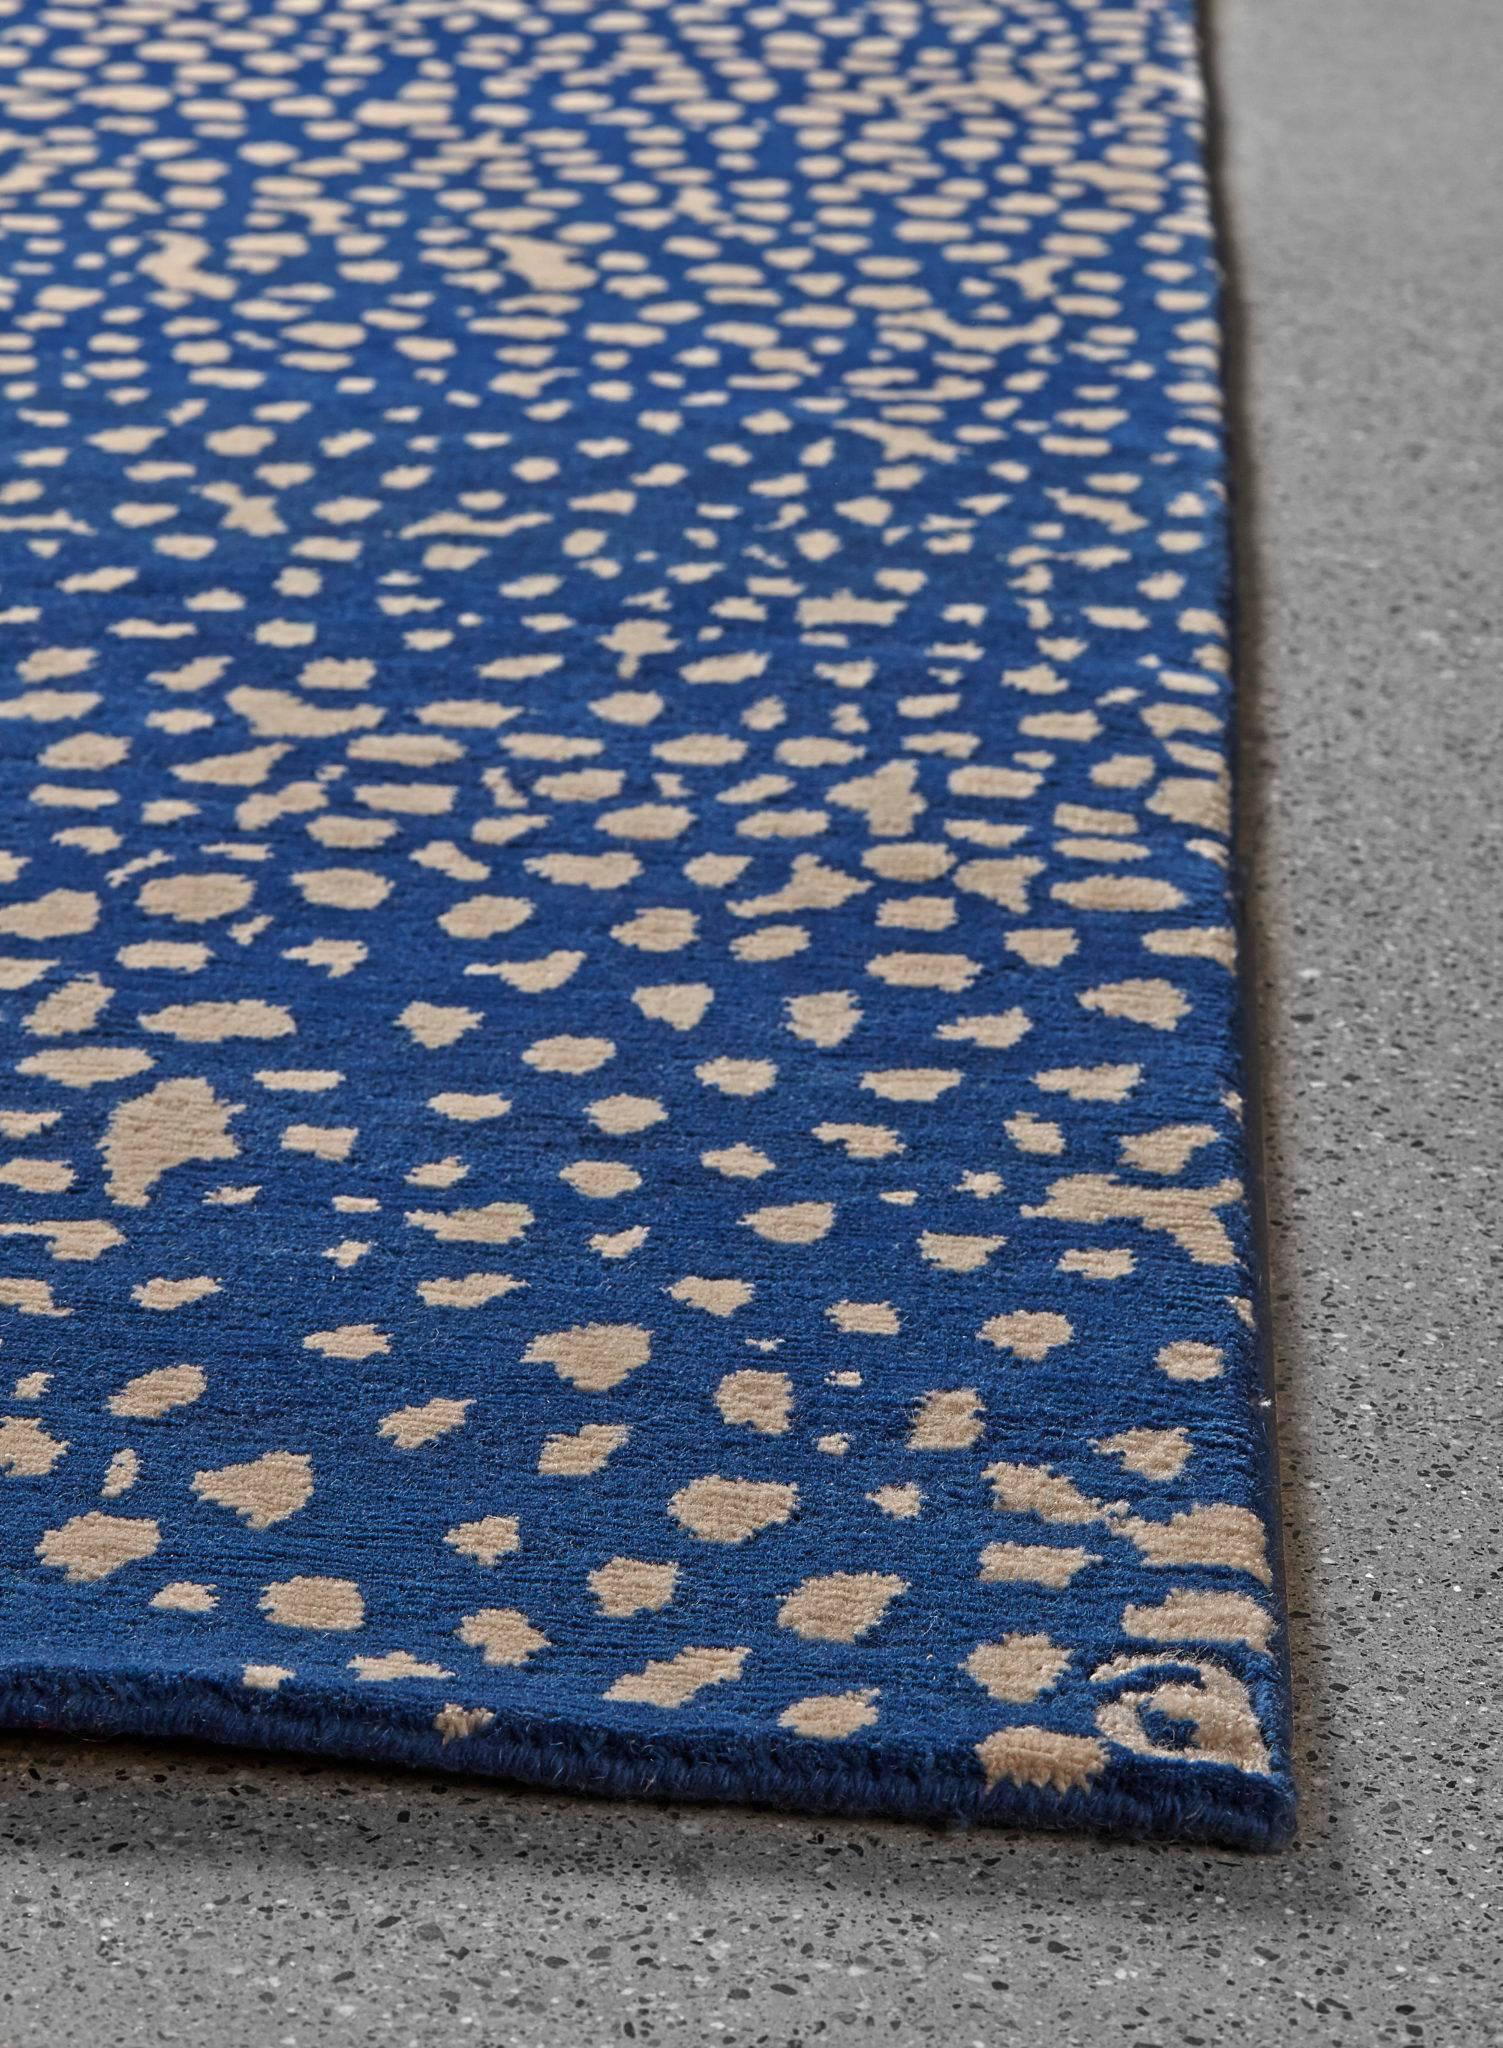 Angela Adams Starry, Blue Area Rug, 100% New Zealand Wool, Hand-Knotted, Modern  For Sale 1